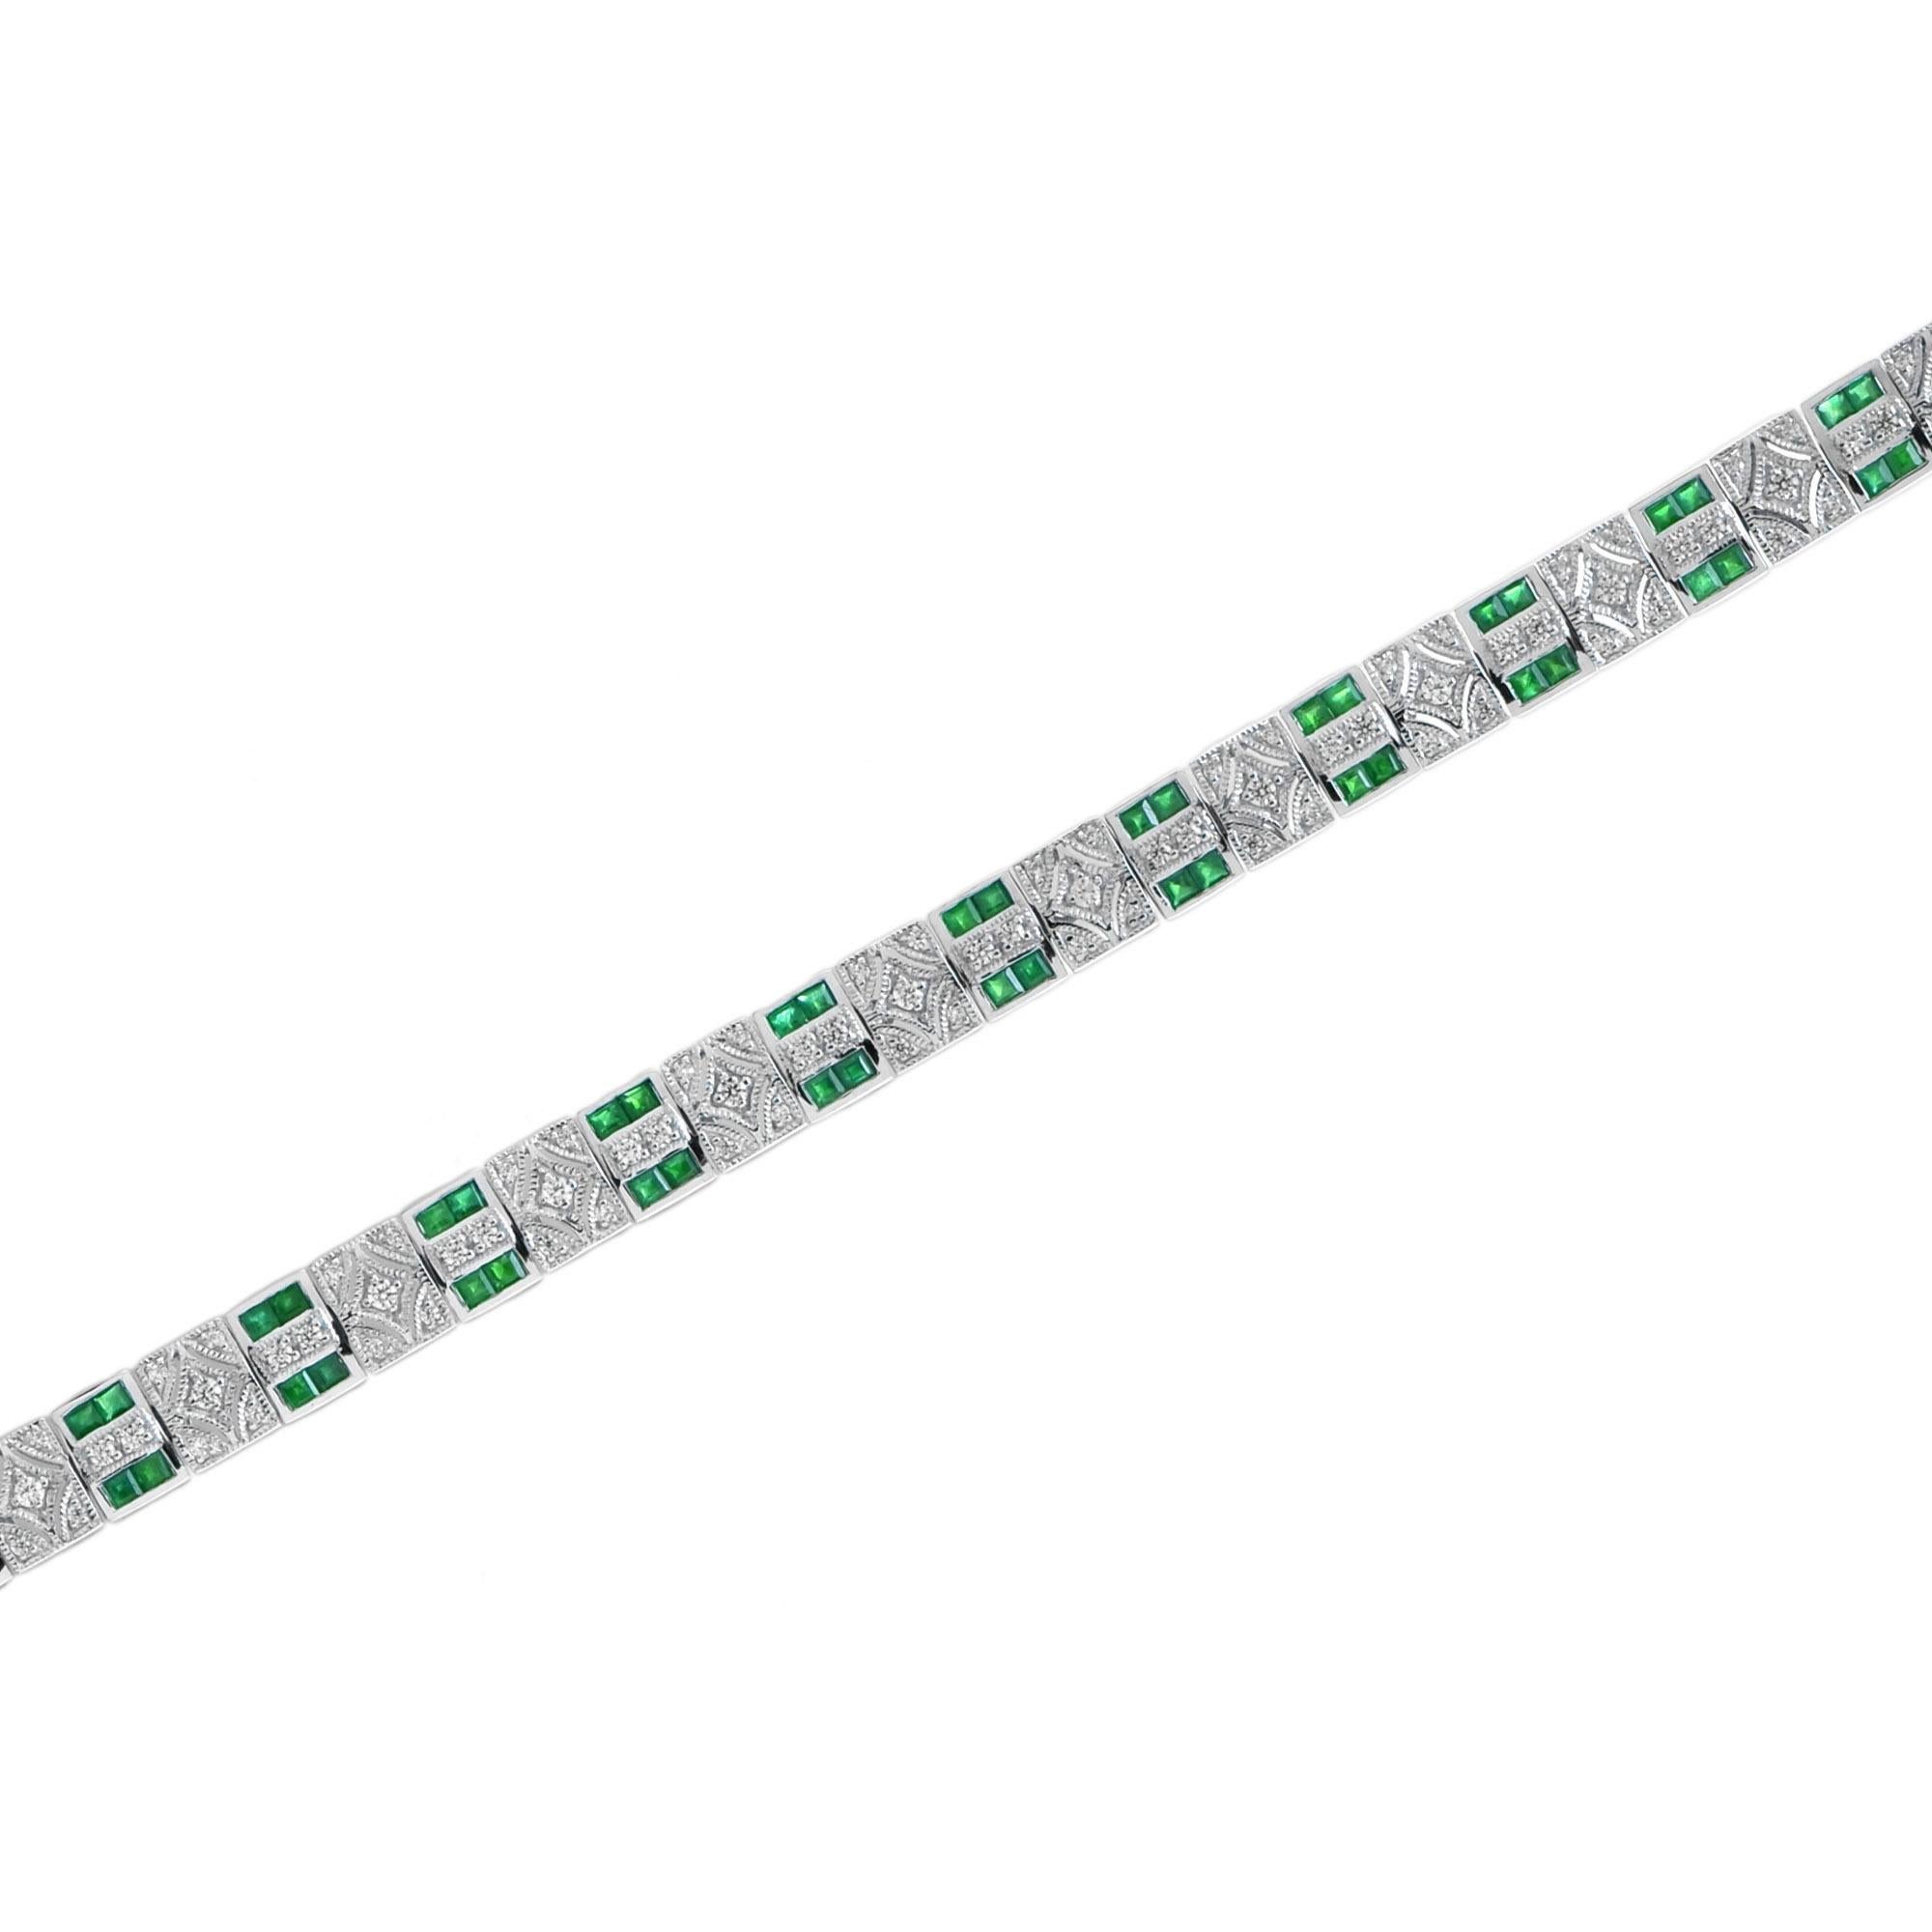 This art deco bar link bracelet is the epitome of vintage-inspired elegance featuring mesmerizing geometric patterns feature with emeralds and diamonds.

Bracelet Information
Metal: 18K White Gold
Width: 8 mm.
Length: 195 mm.
Weight: 20.00 g.